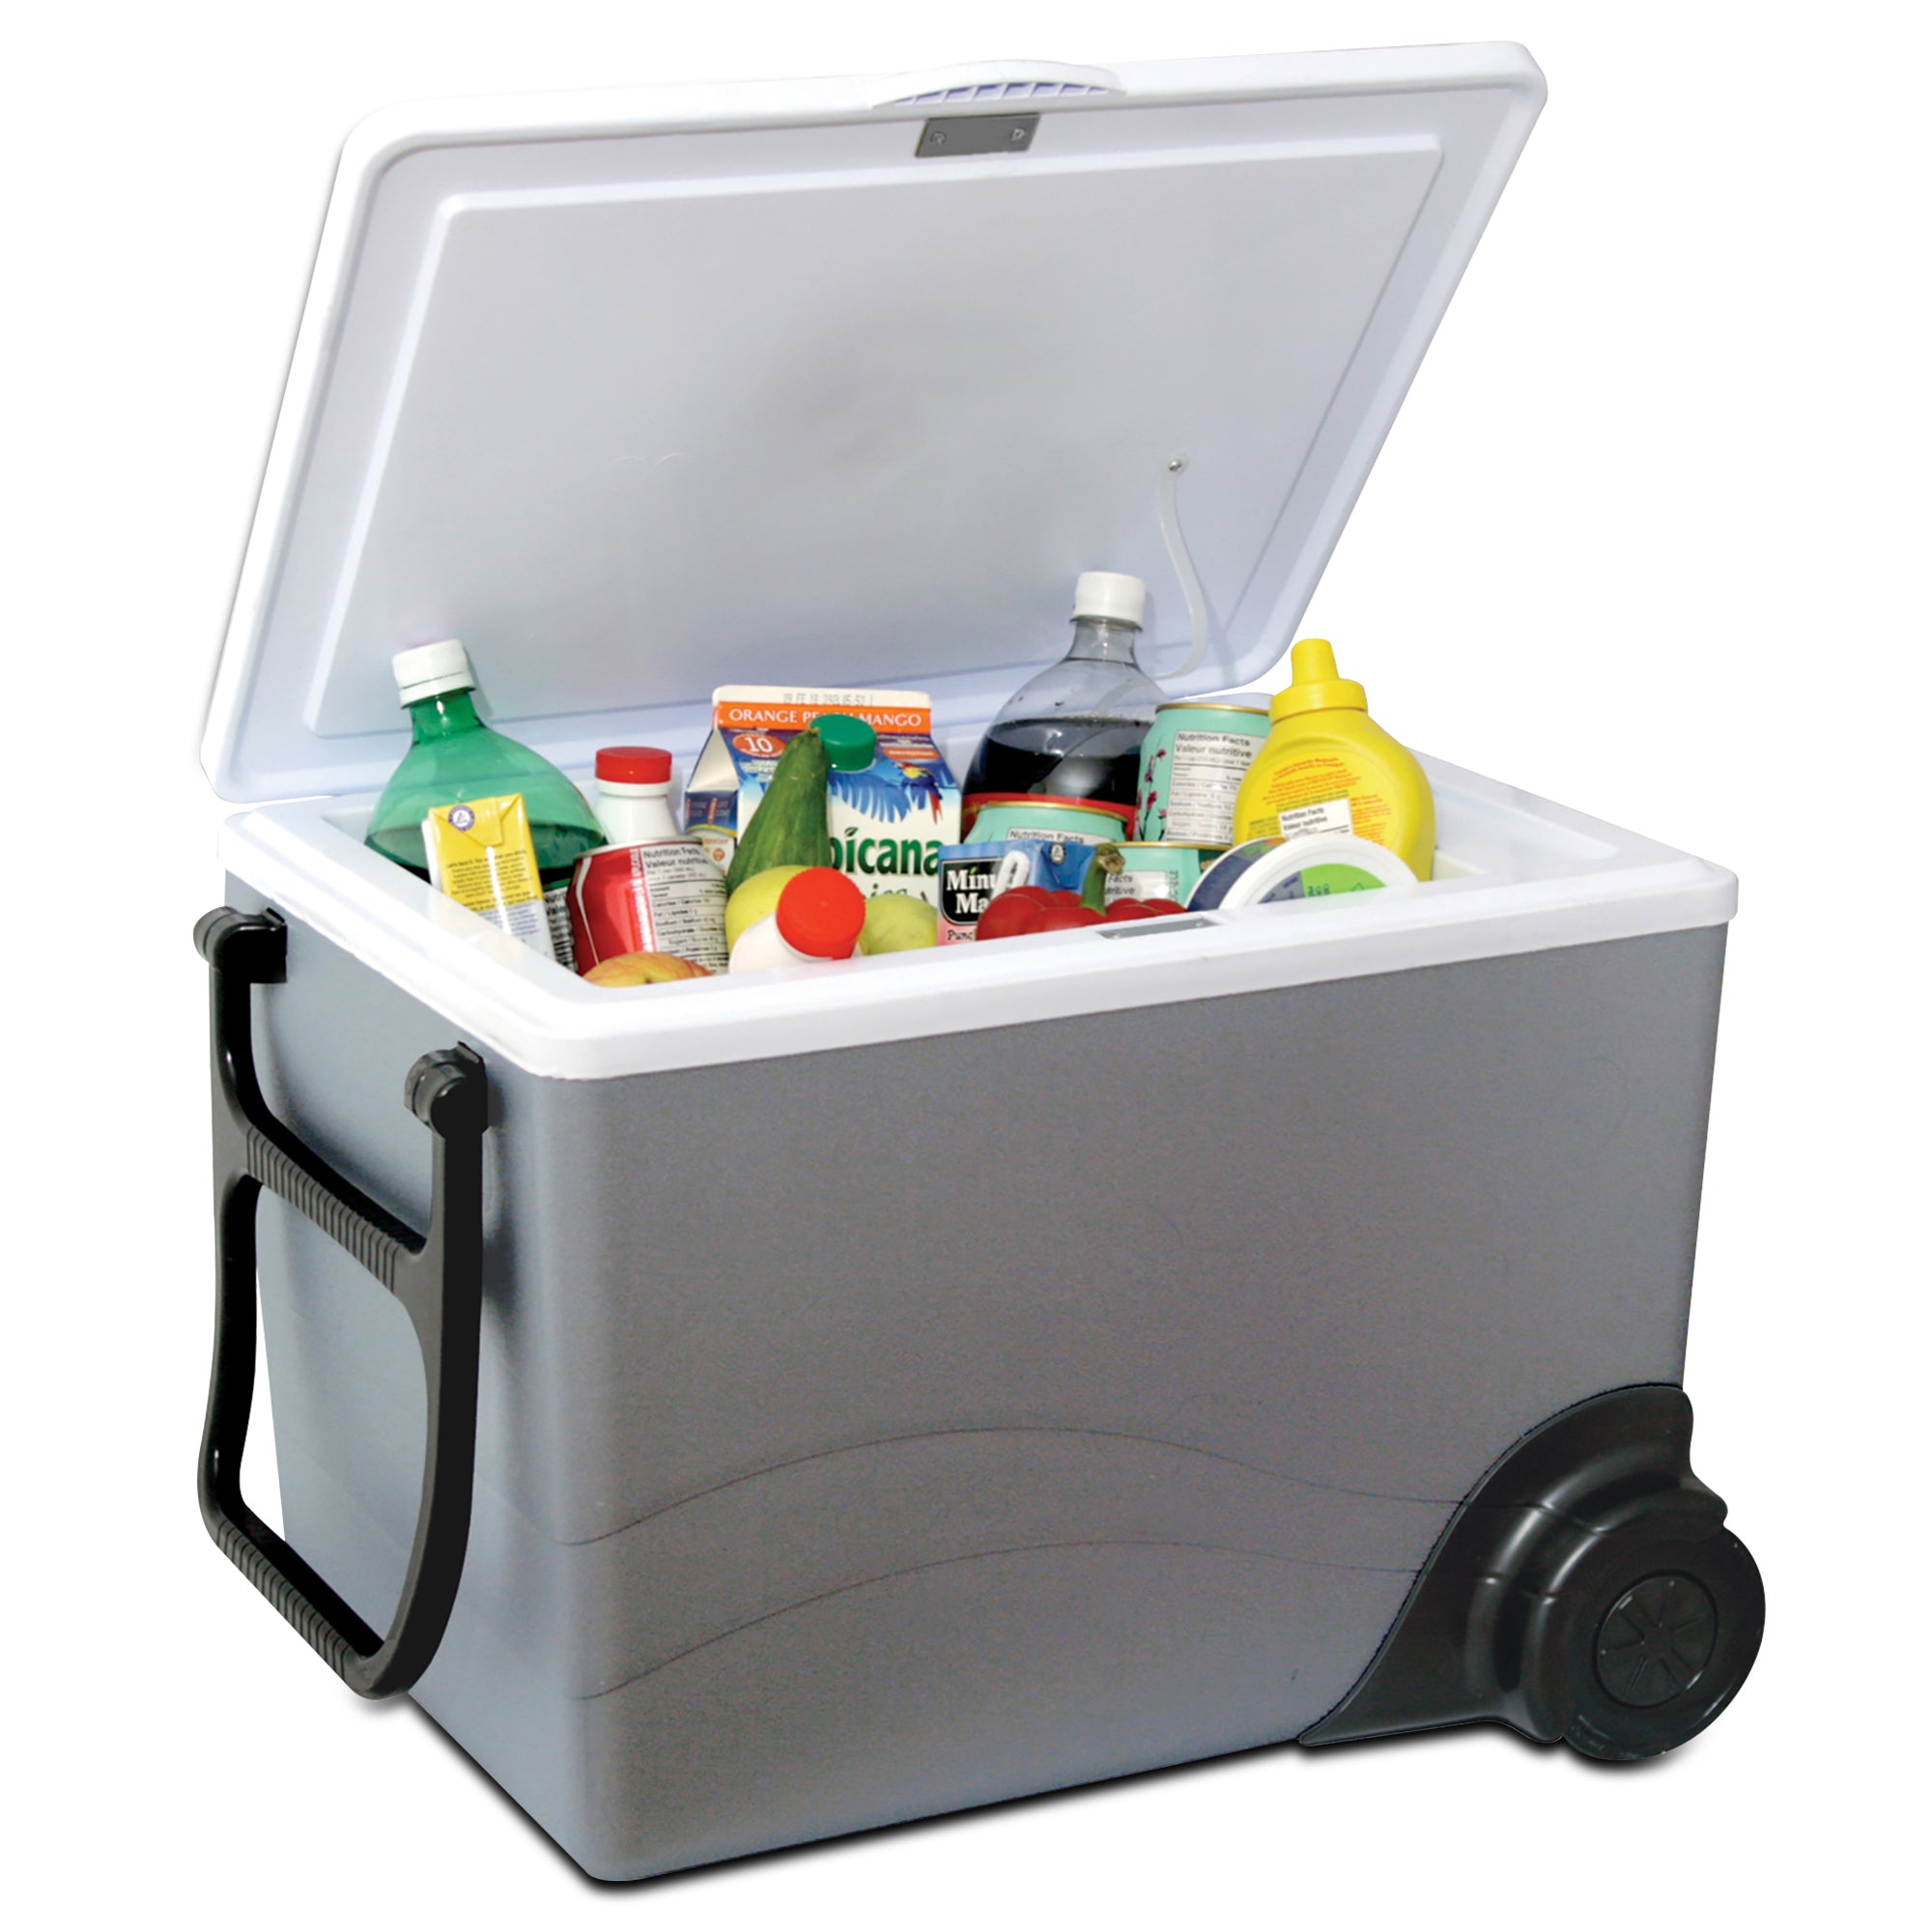 Koolatron wheeled 12V travel cooler/warmer, open with food inside, on a white background